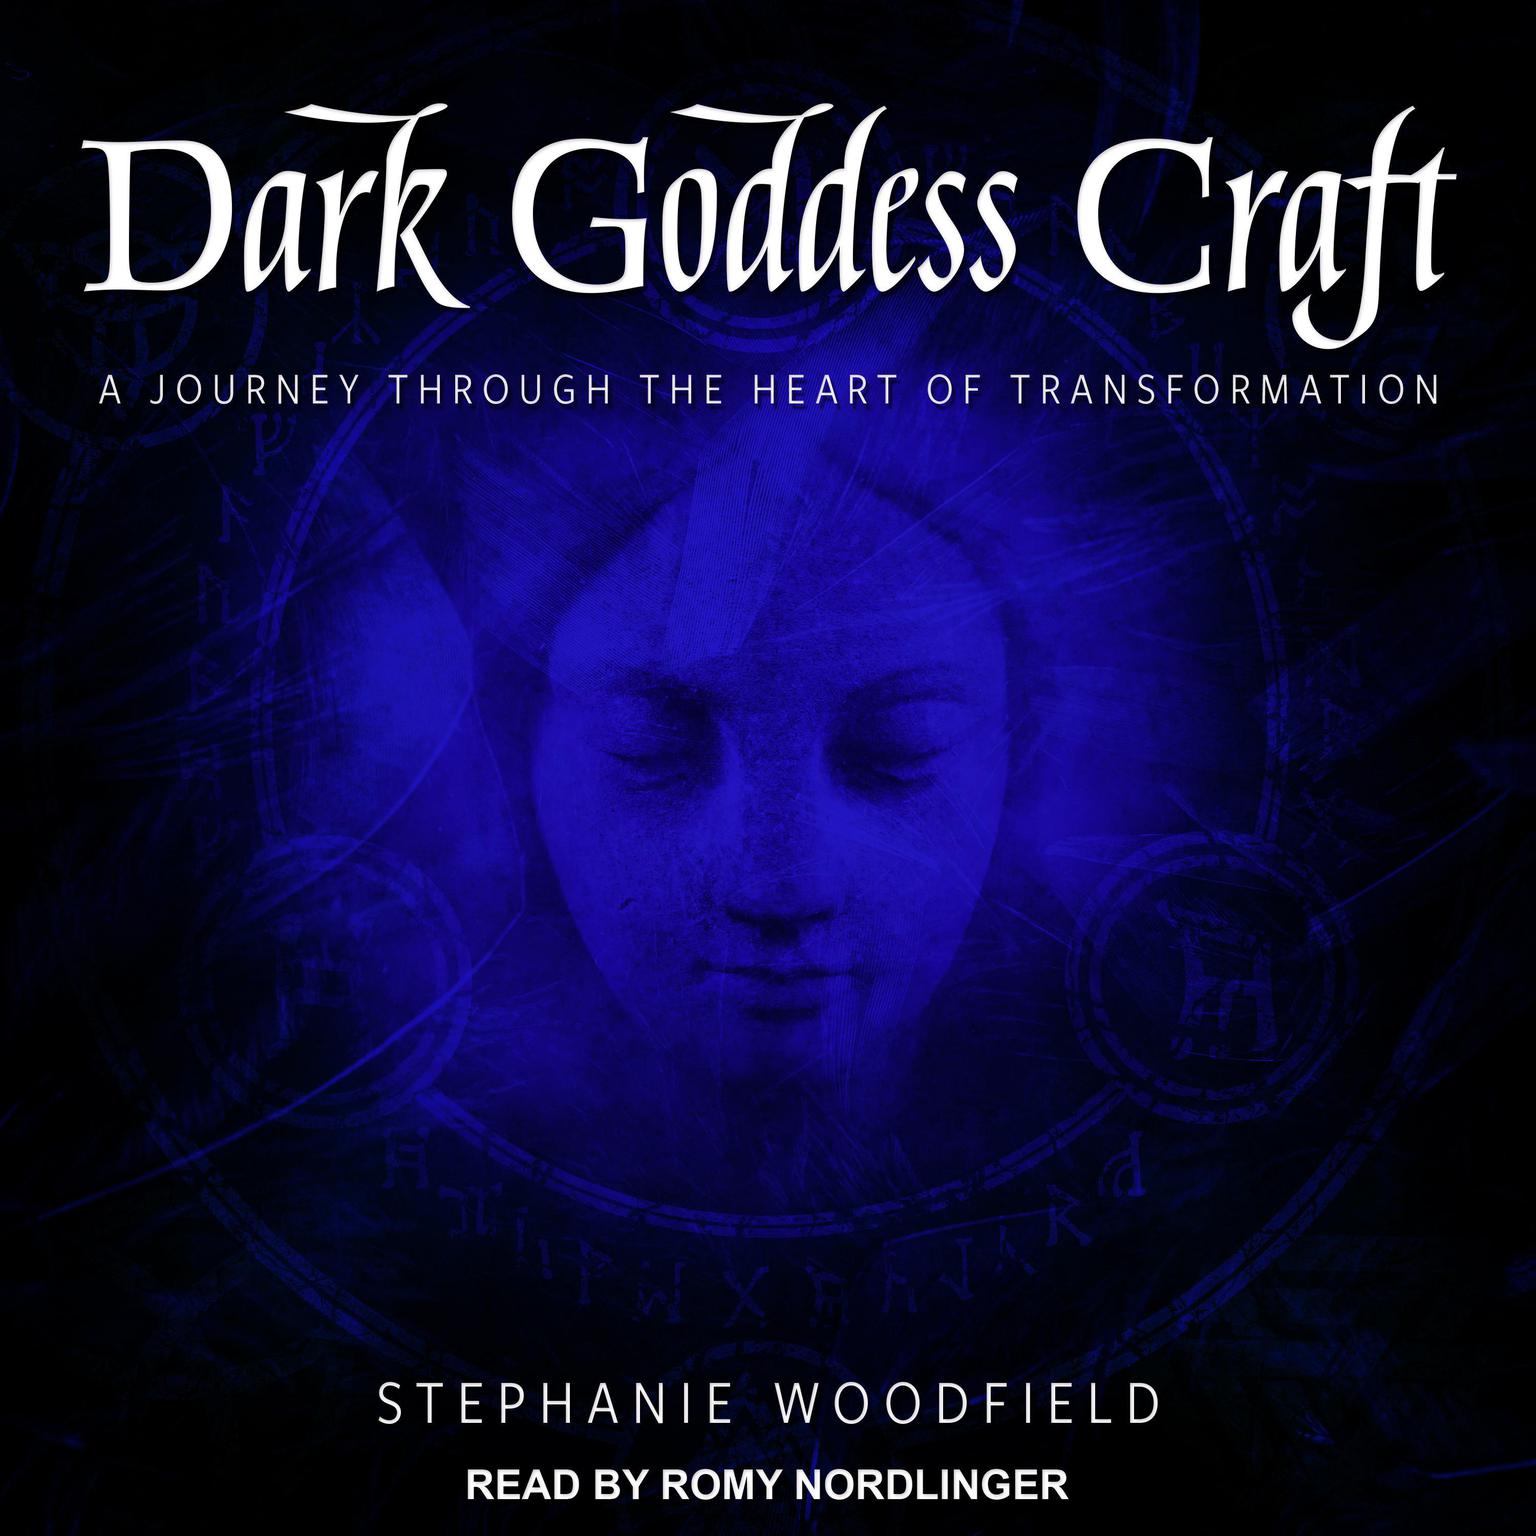 Dark Goddess Craft: A Journey through the Heart of Transformation Audiobook, by Stephanie Woodfield